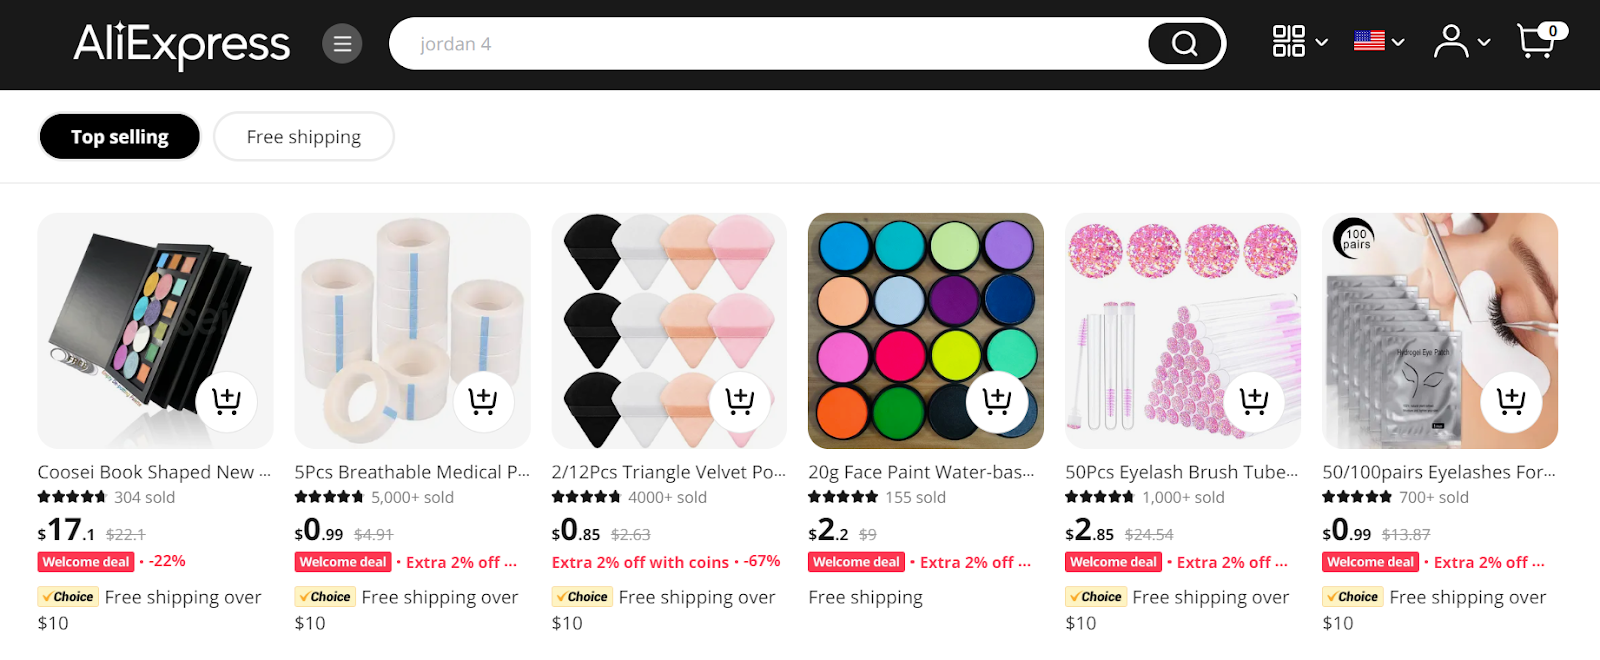 AliExpress beauty products search results page.